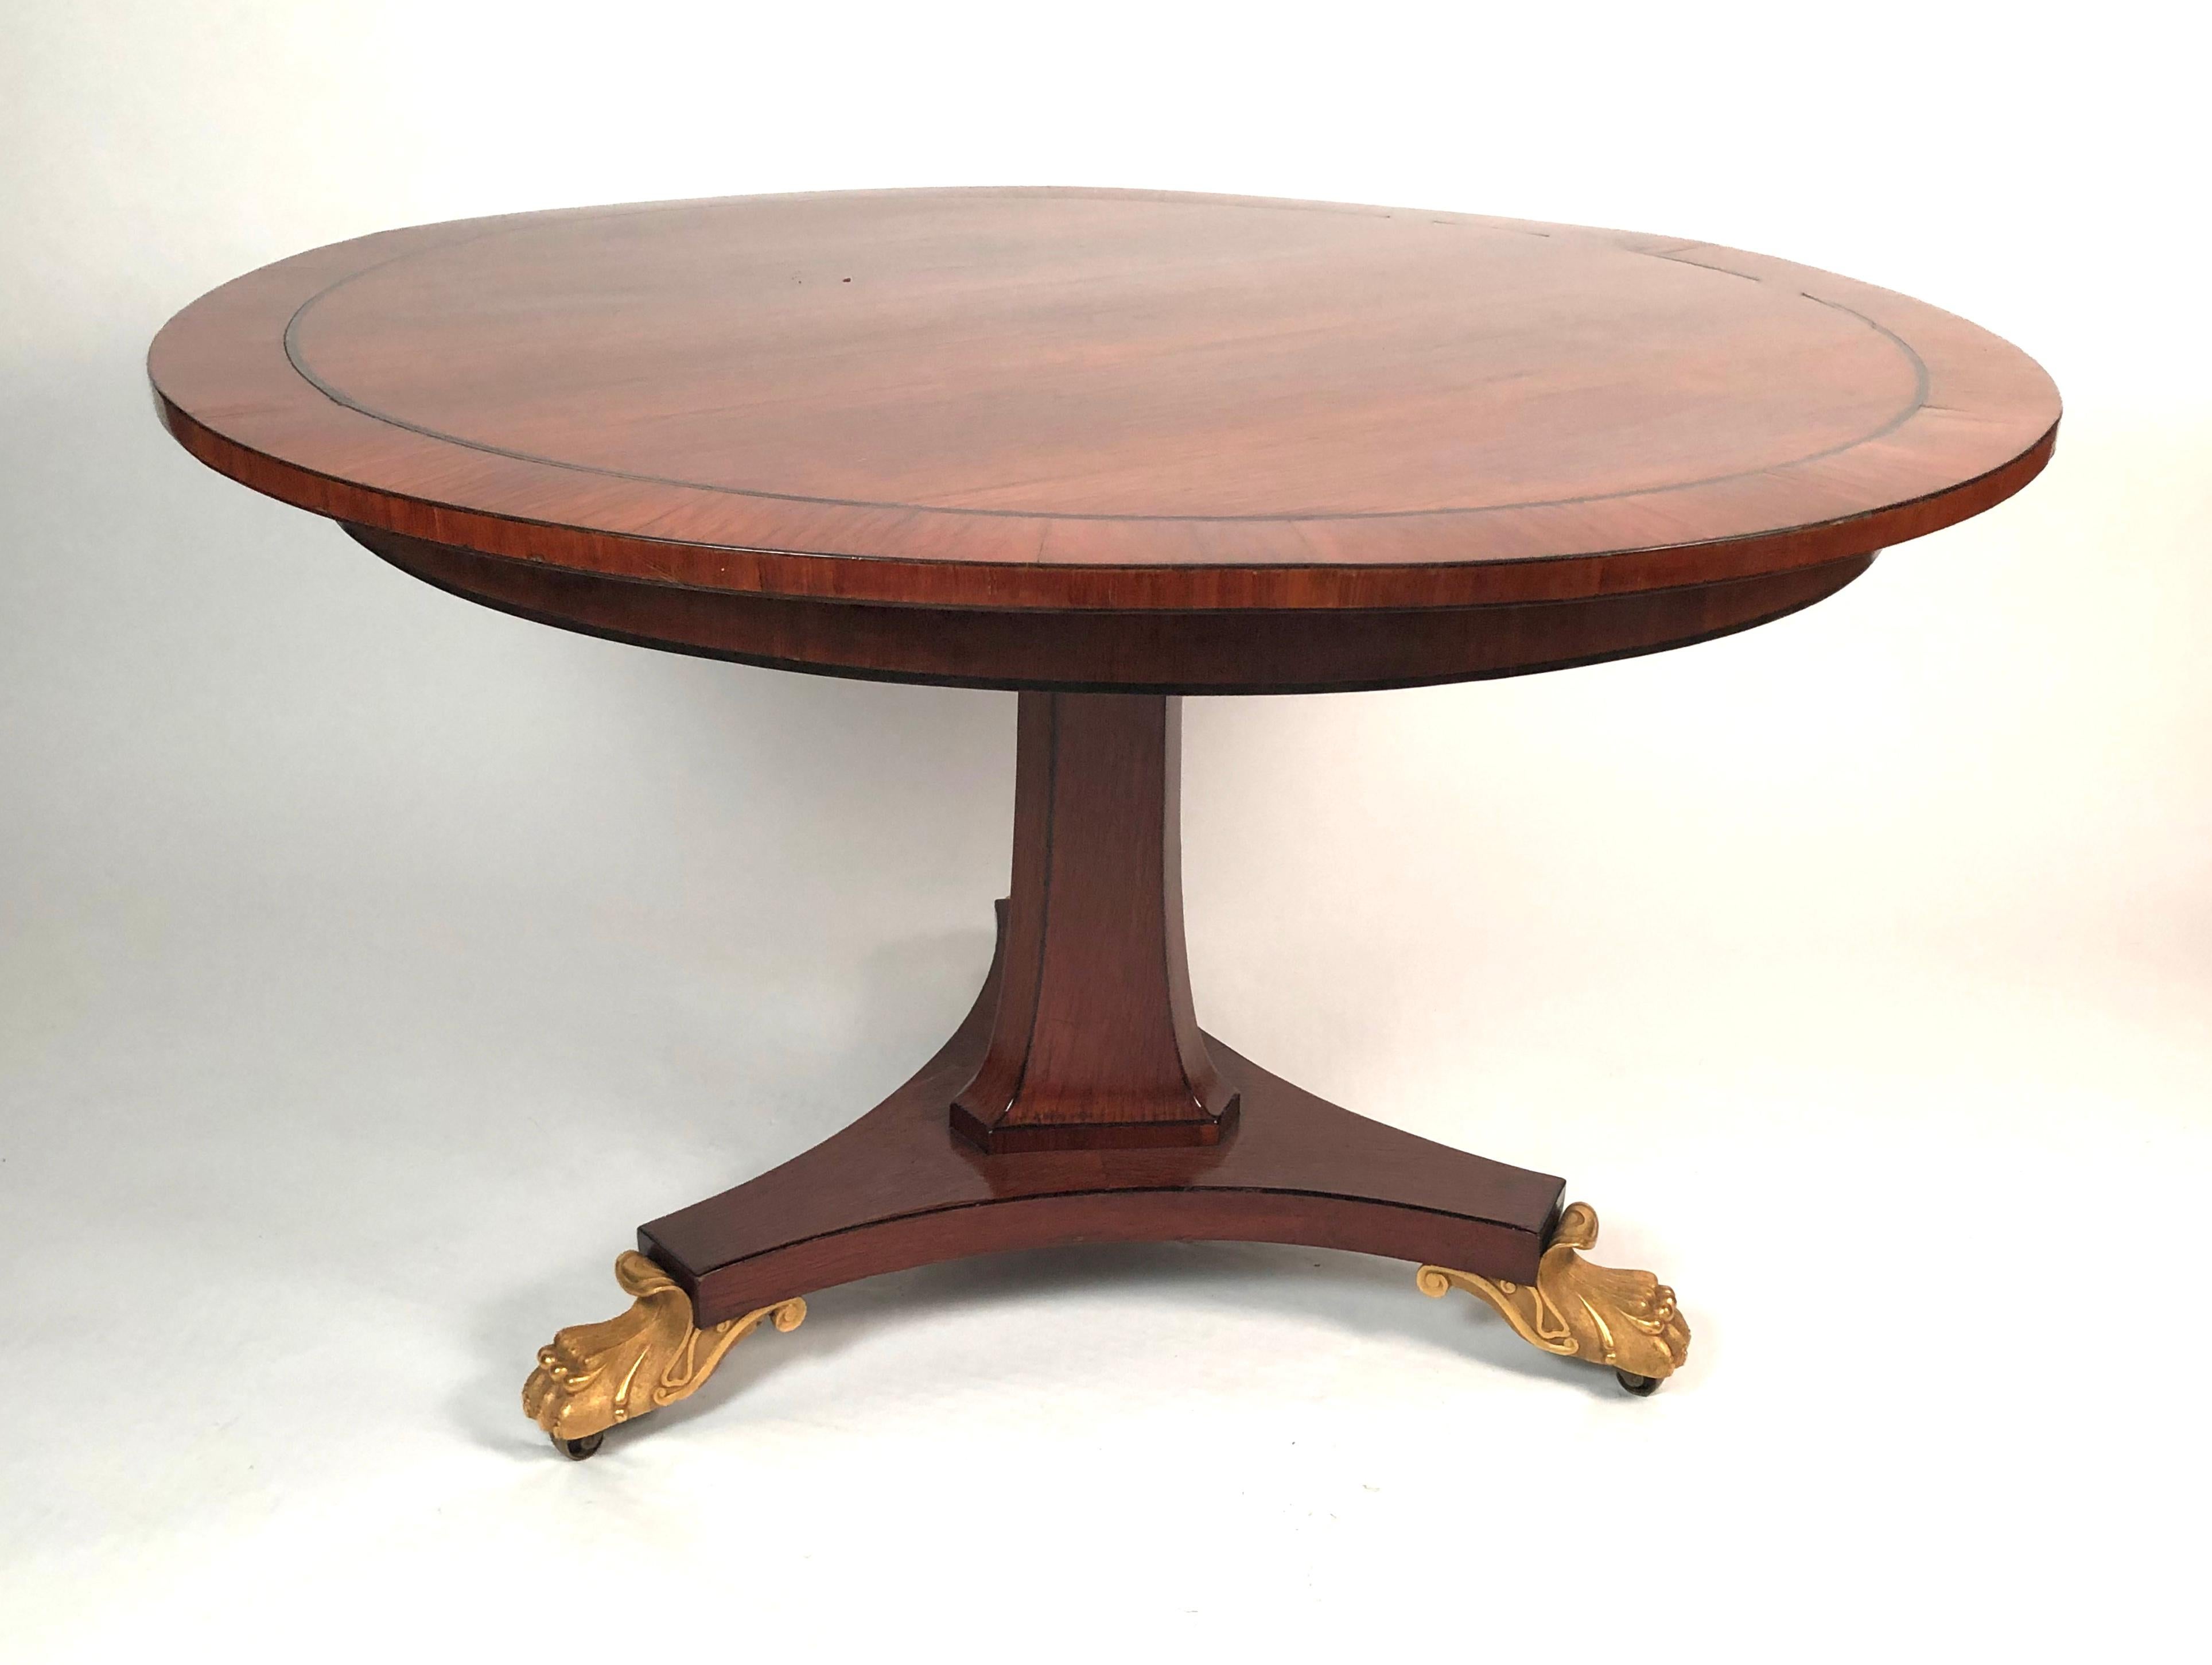 A fine quality English Regency period breakfast or center table in palm wood, the circular top with crossbanding and ebony stringing, supported on a spreading triangular column outlined with ebony stringing, raised on a triangular plinth with